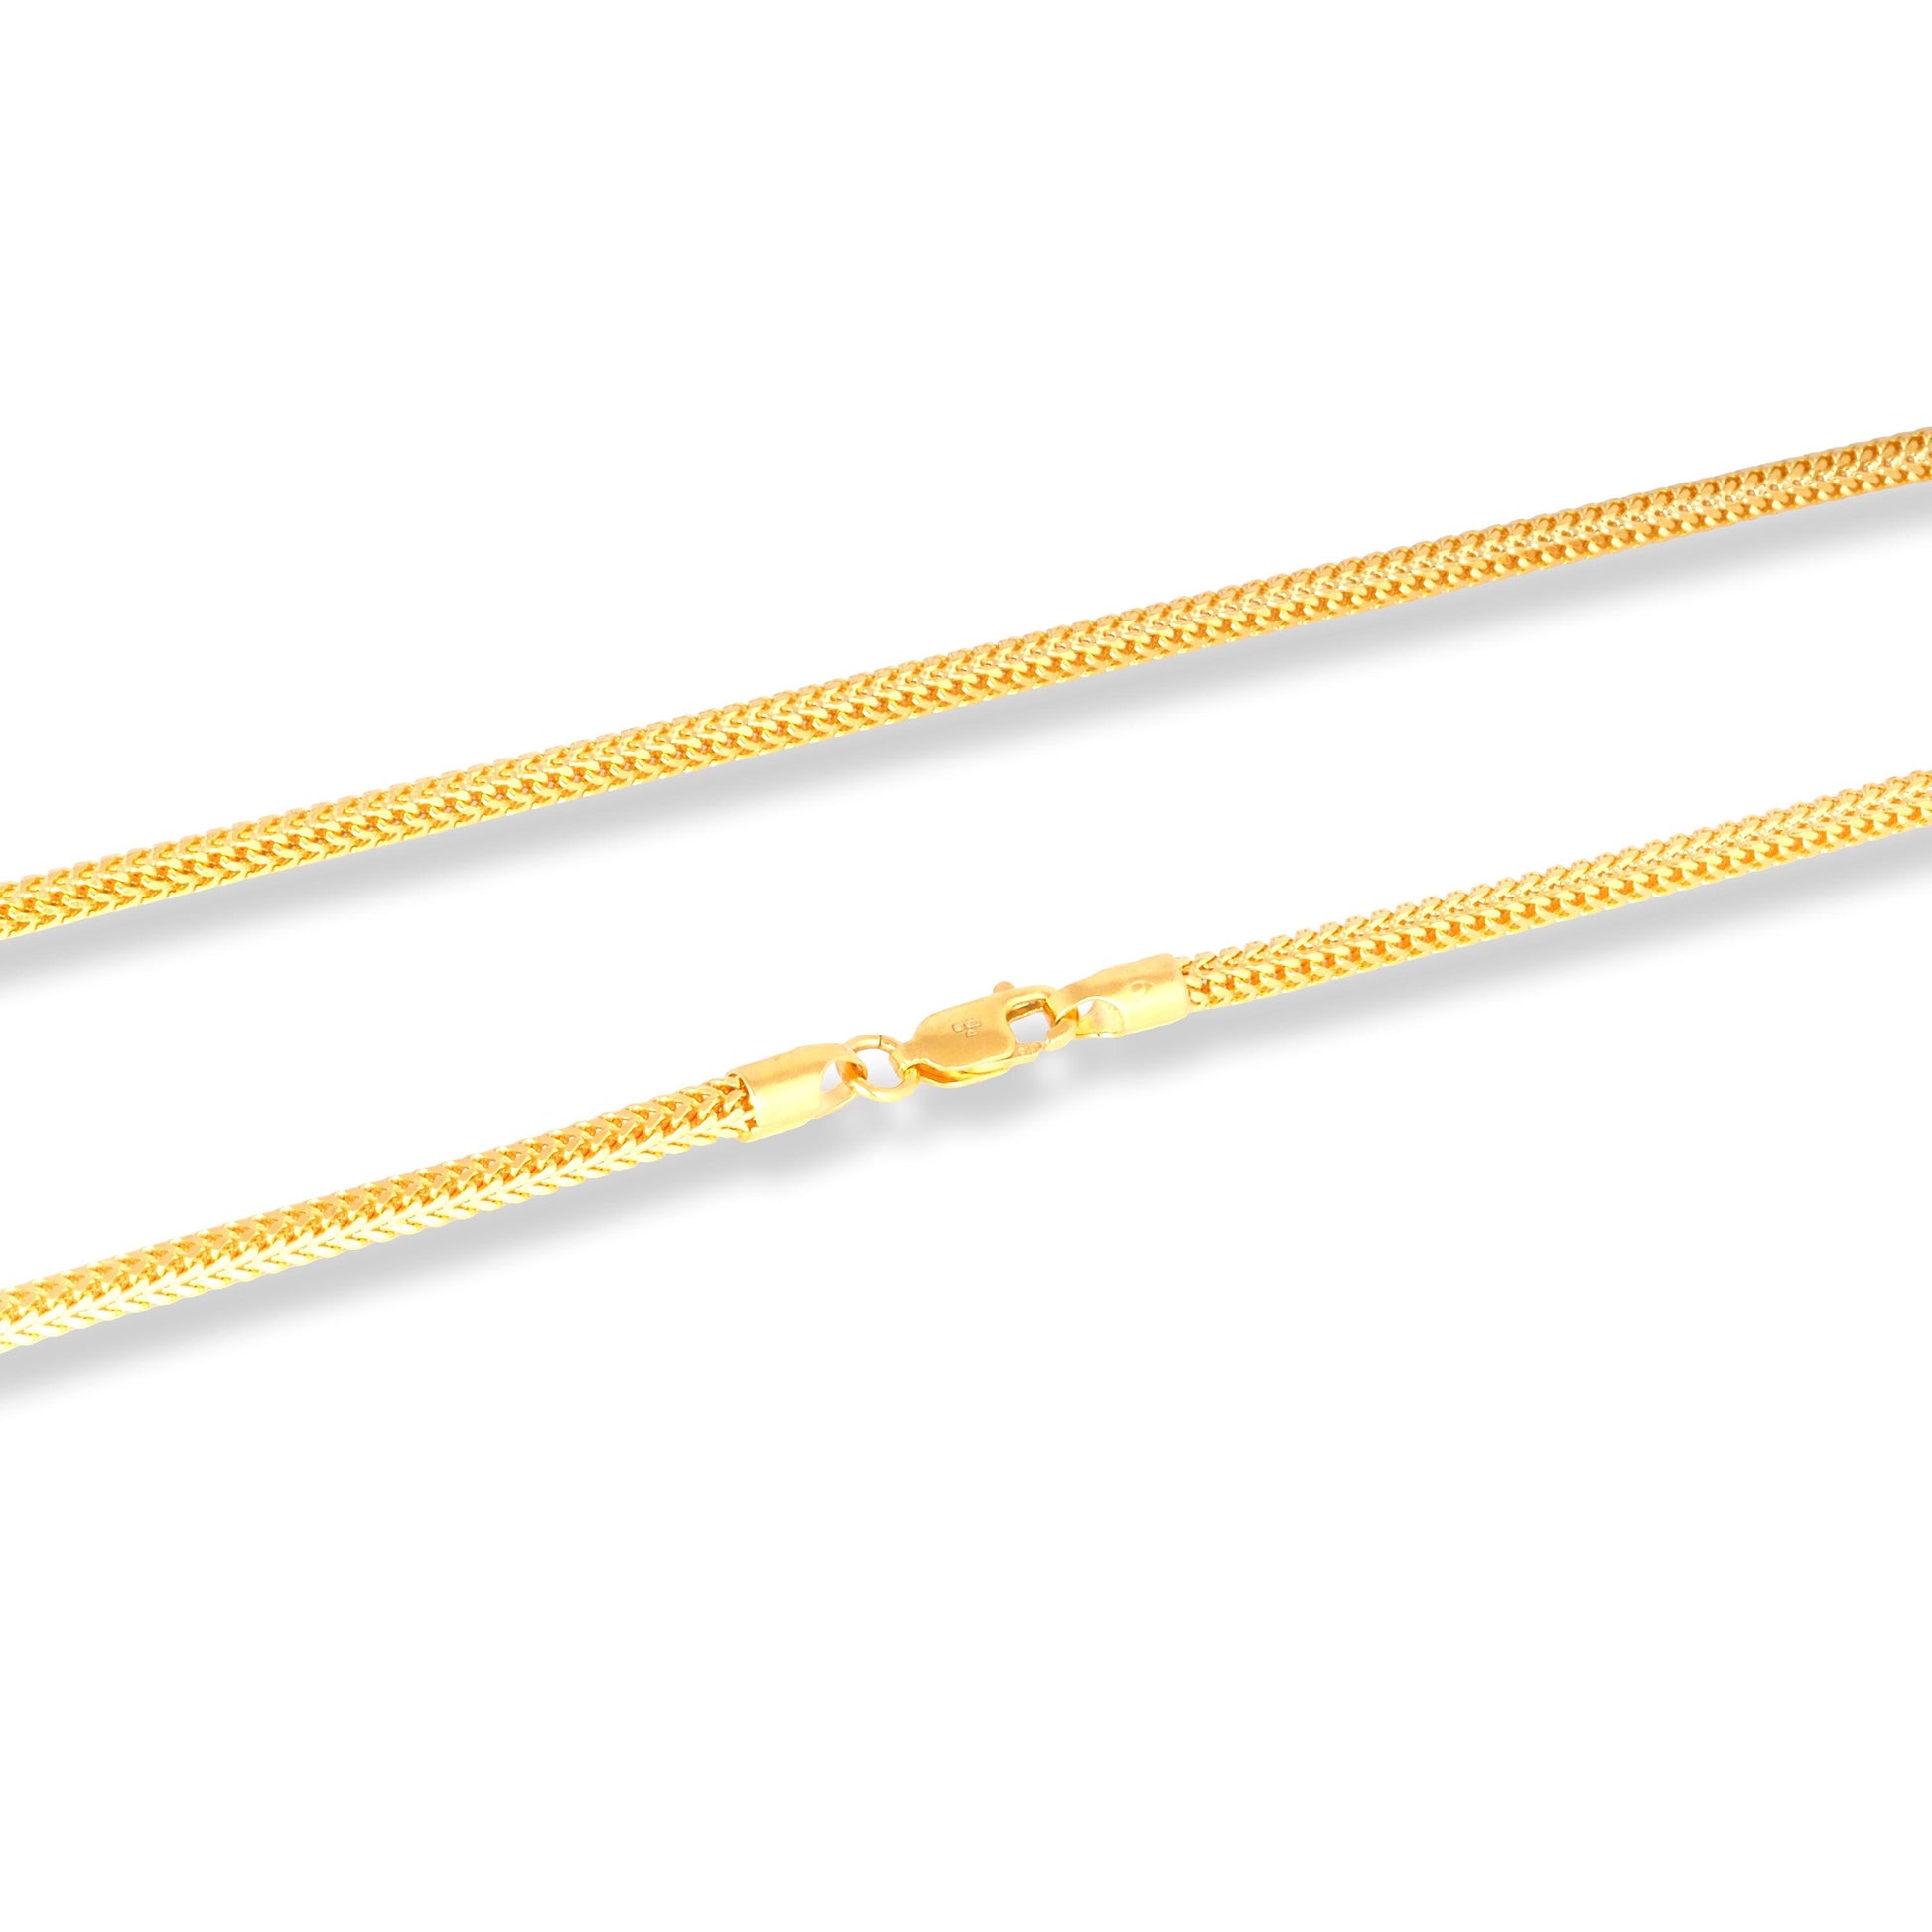 22ct Gold Round Foxtail Chain with Lobster Clasp C-7138 - Minar Jewellers